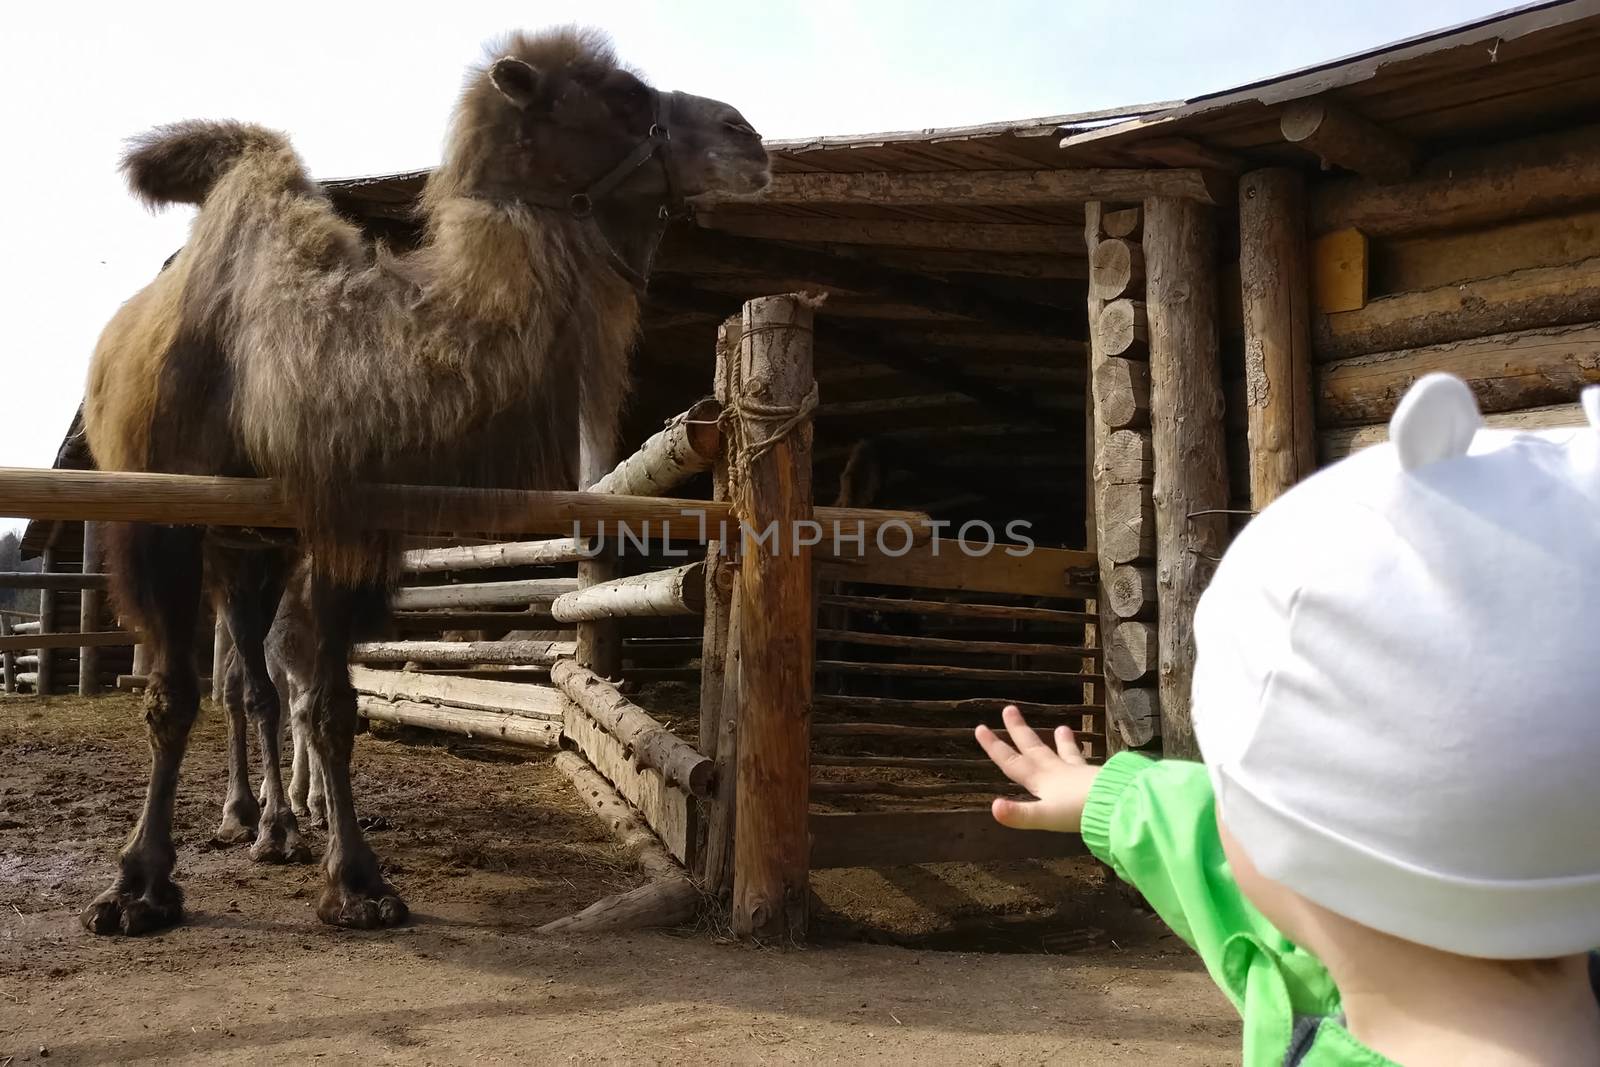 The child pulls his hand towards the camel. Camels in a paddock in an ethnopark. Hairy two-humped camels.